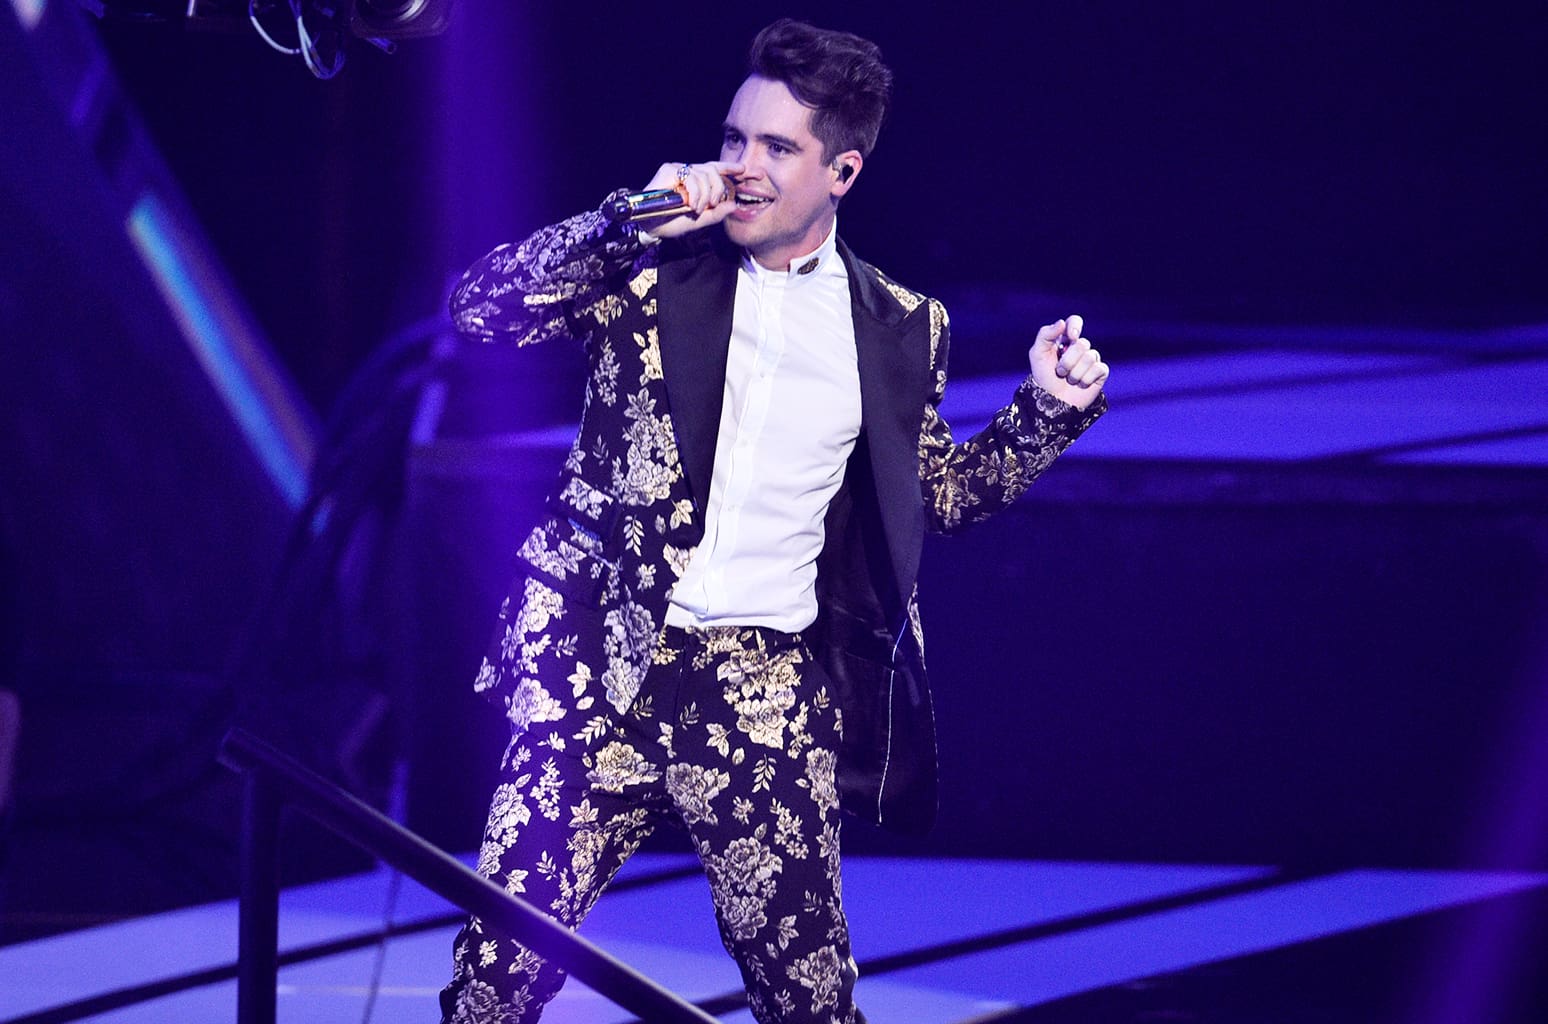 REVIEW Panic! At The Disco’s Pray For The Wicked Tour ECHO